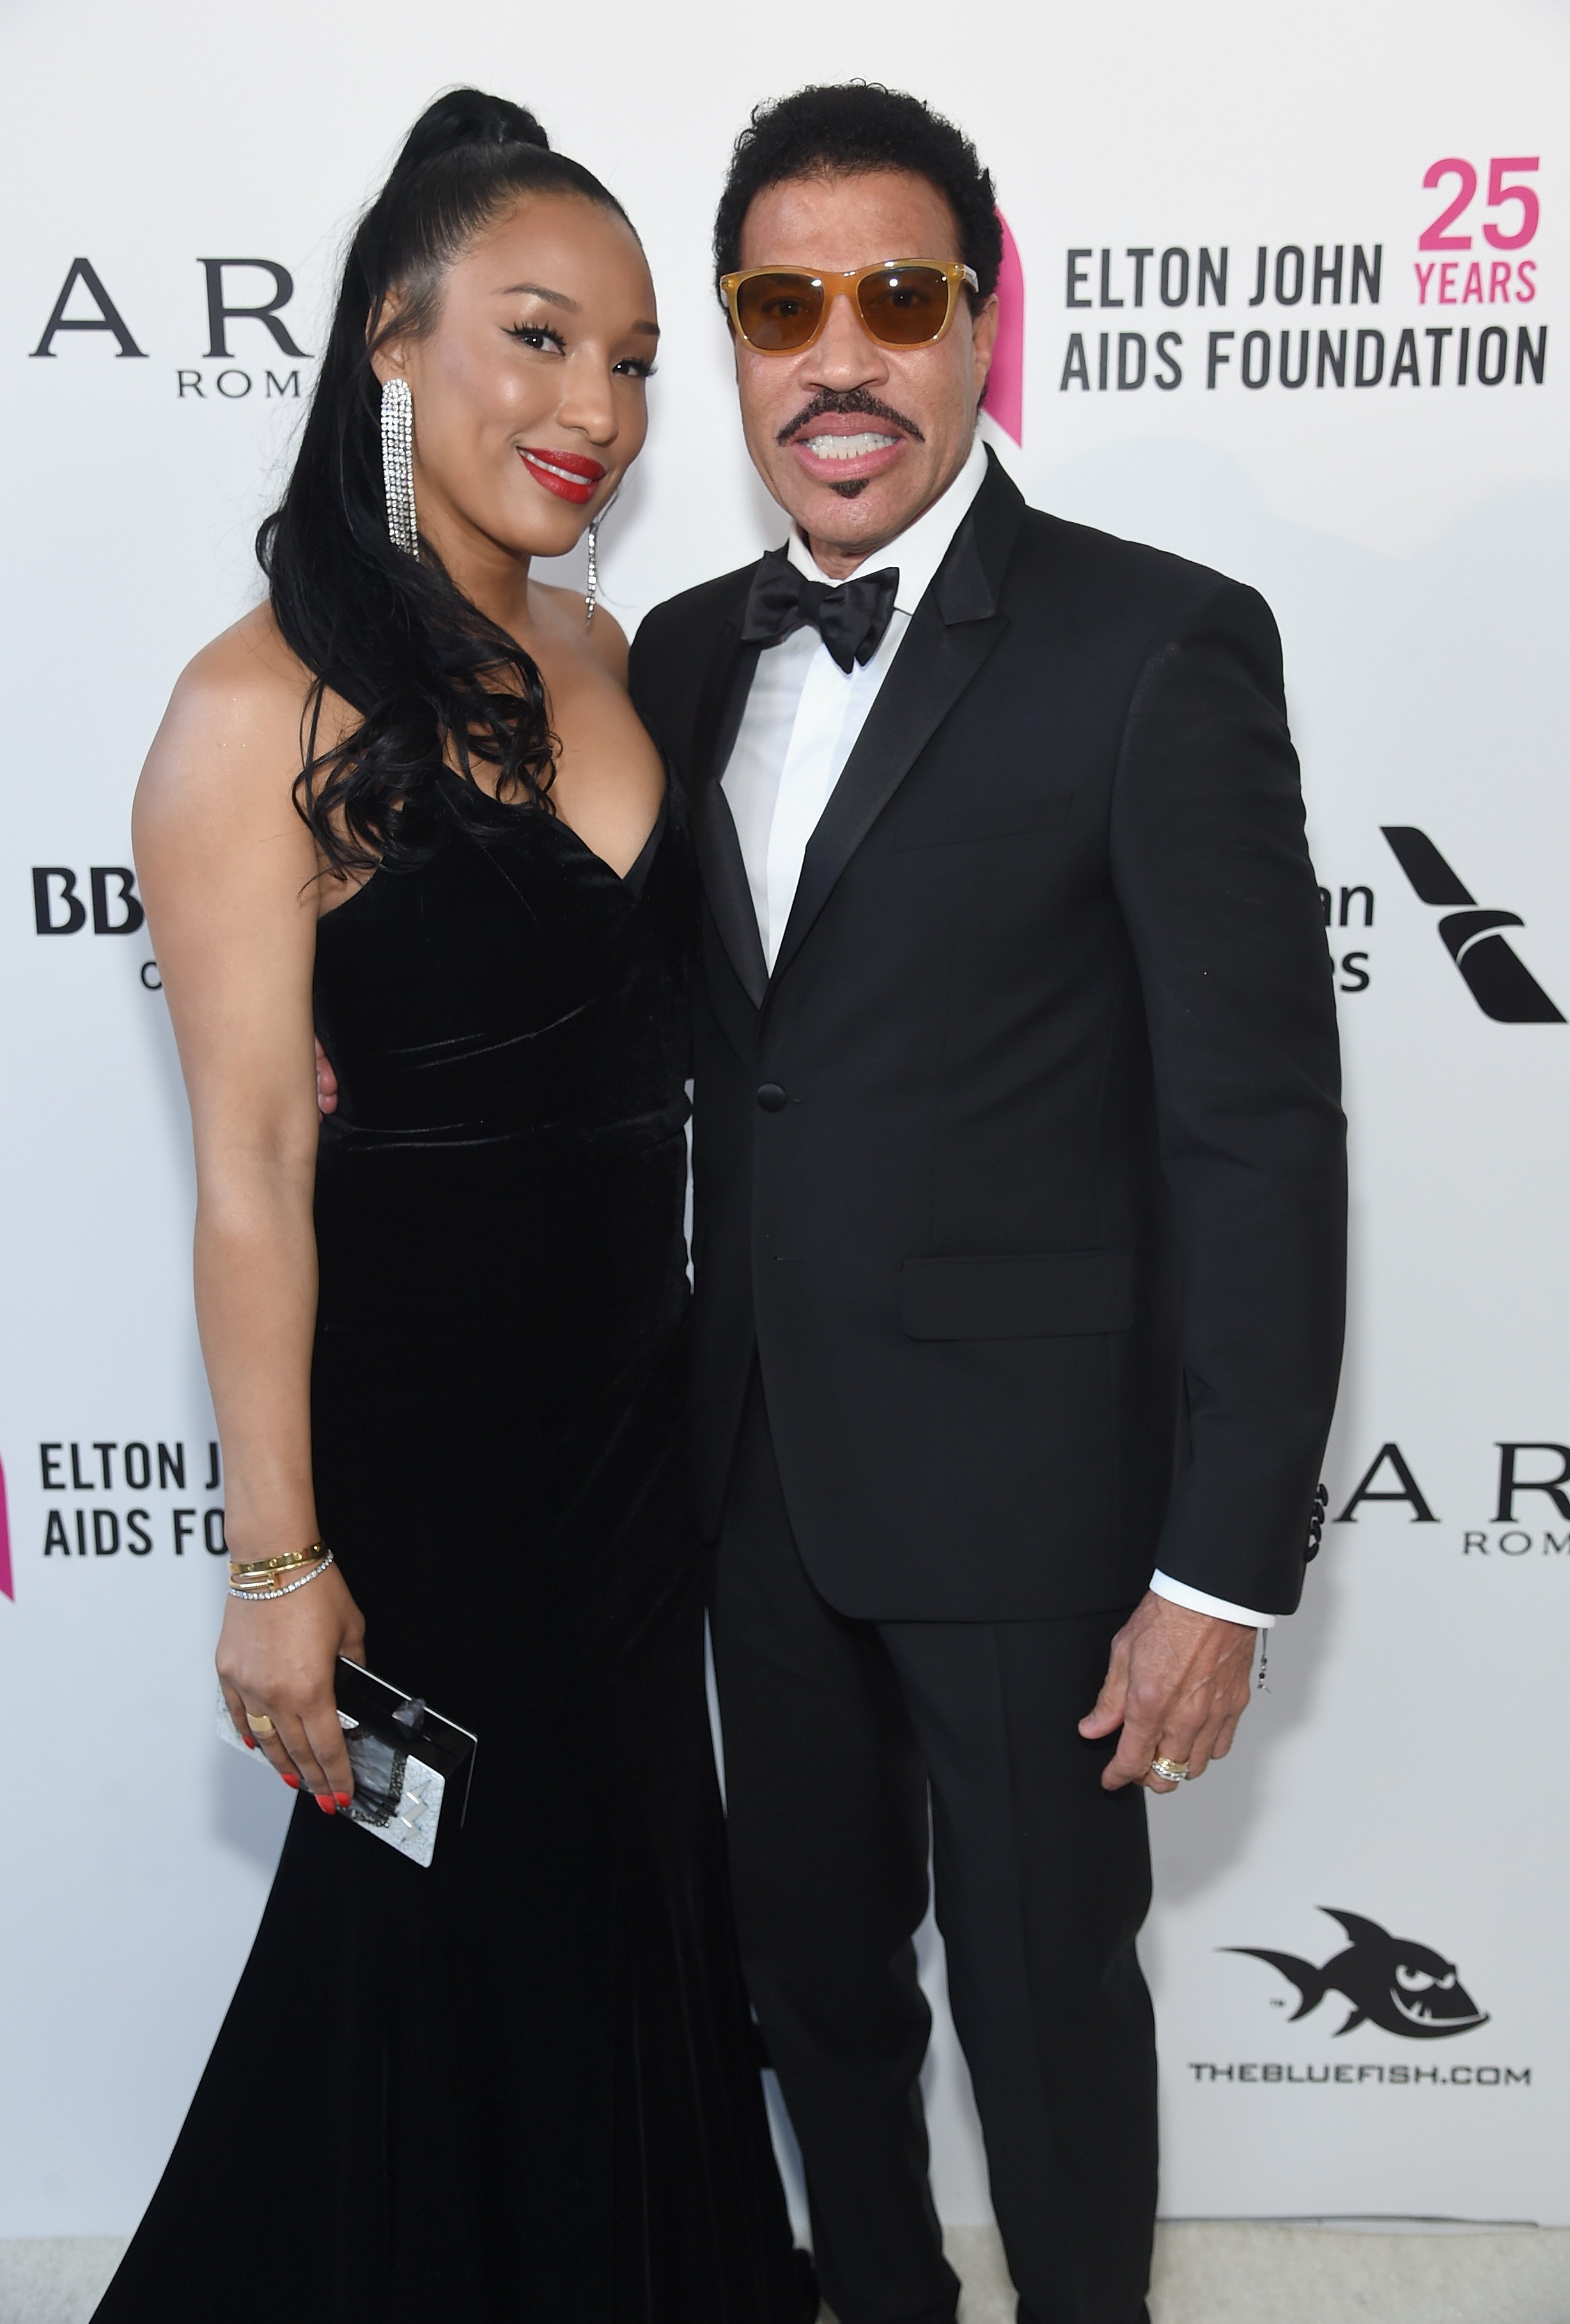 Lisa Parigi and Lionel Richie at the 26th annual Elton John AIDS Foundation Academy Awards Viewing Party on March 4, 2018 | Photo: GettyImages